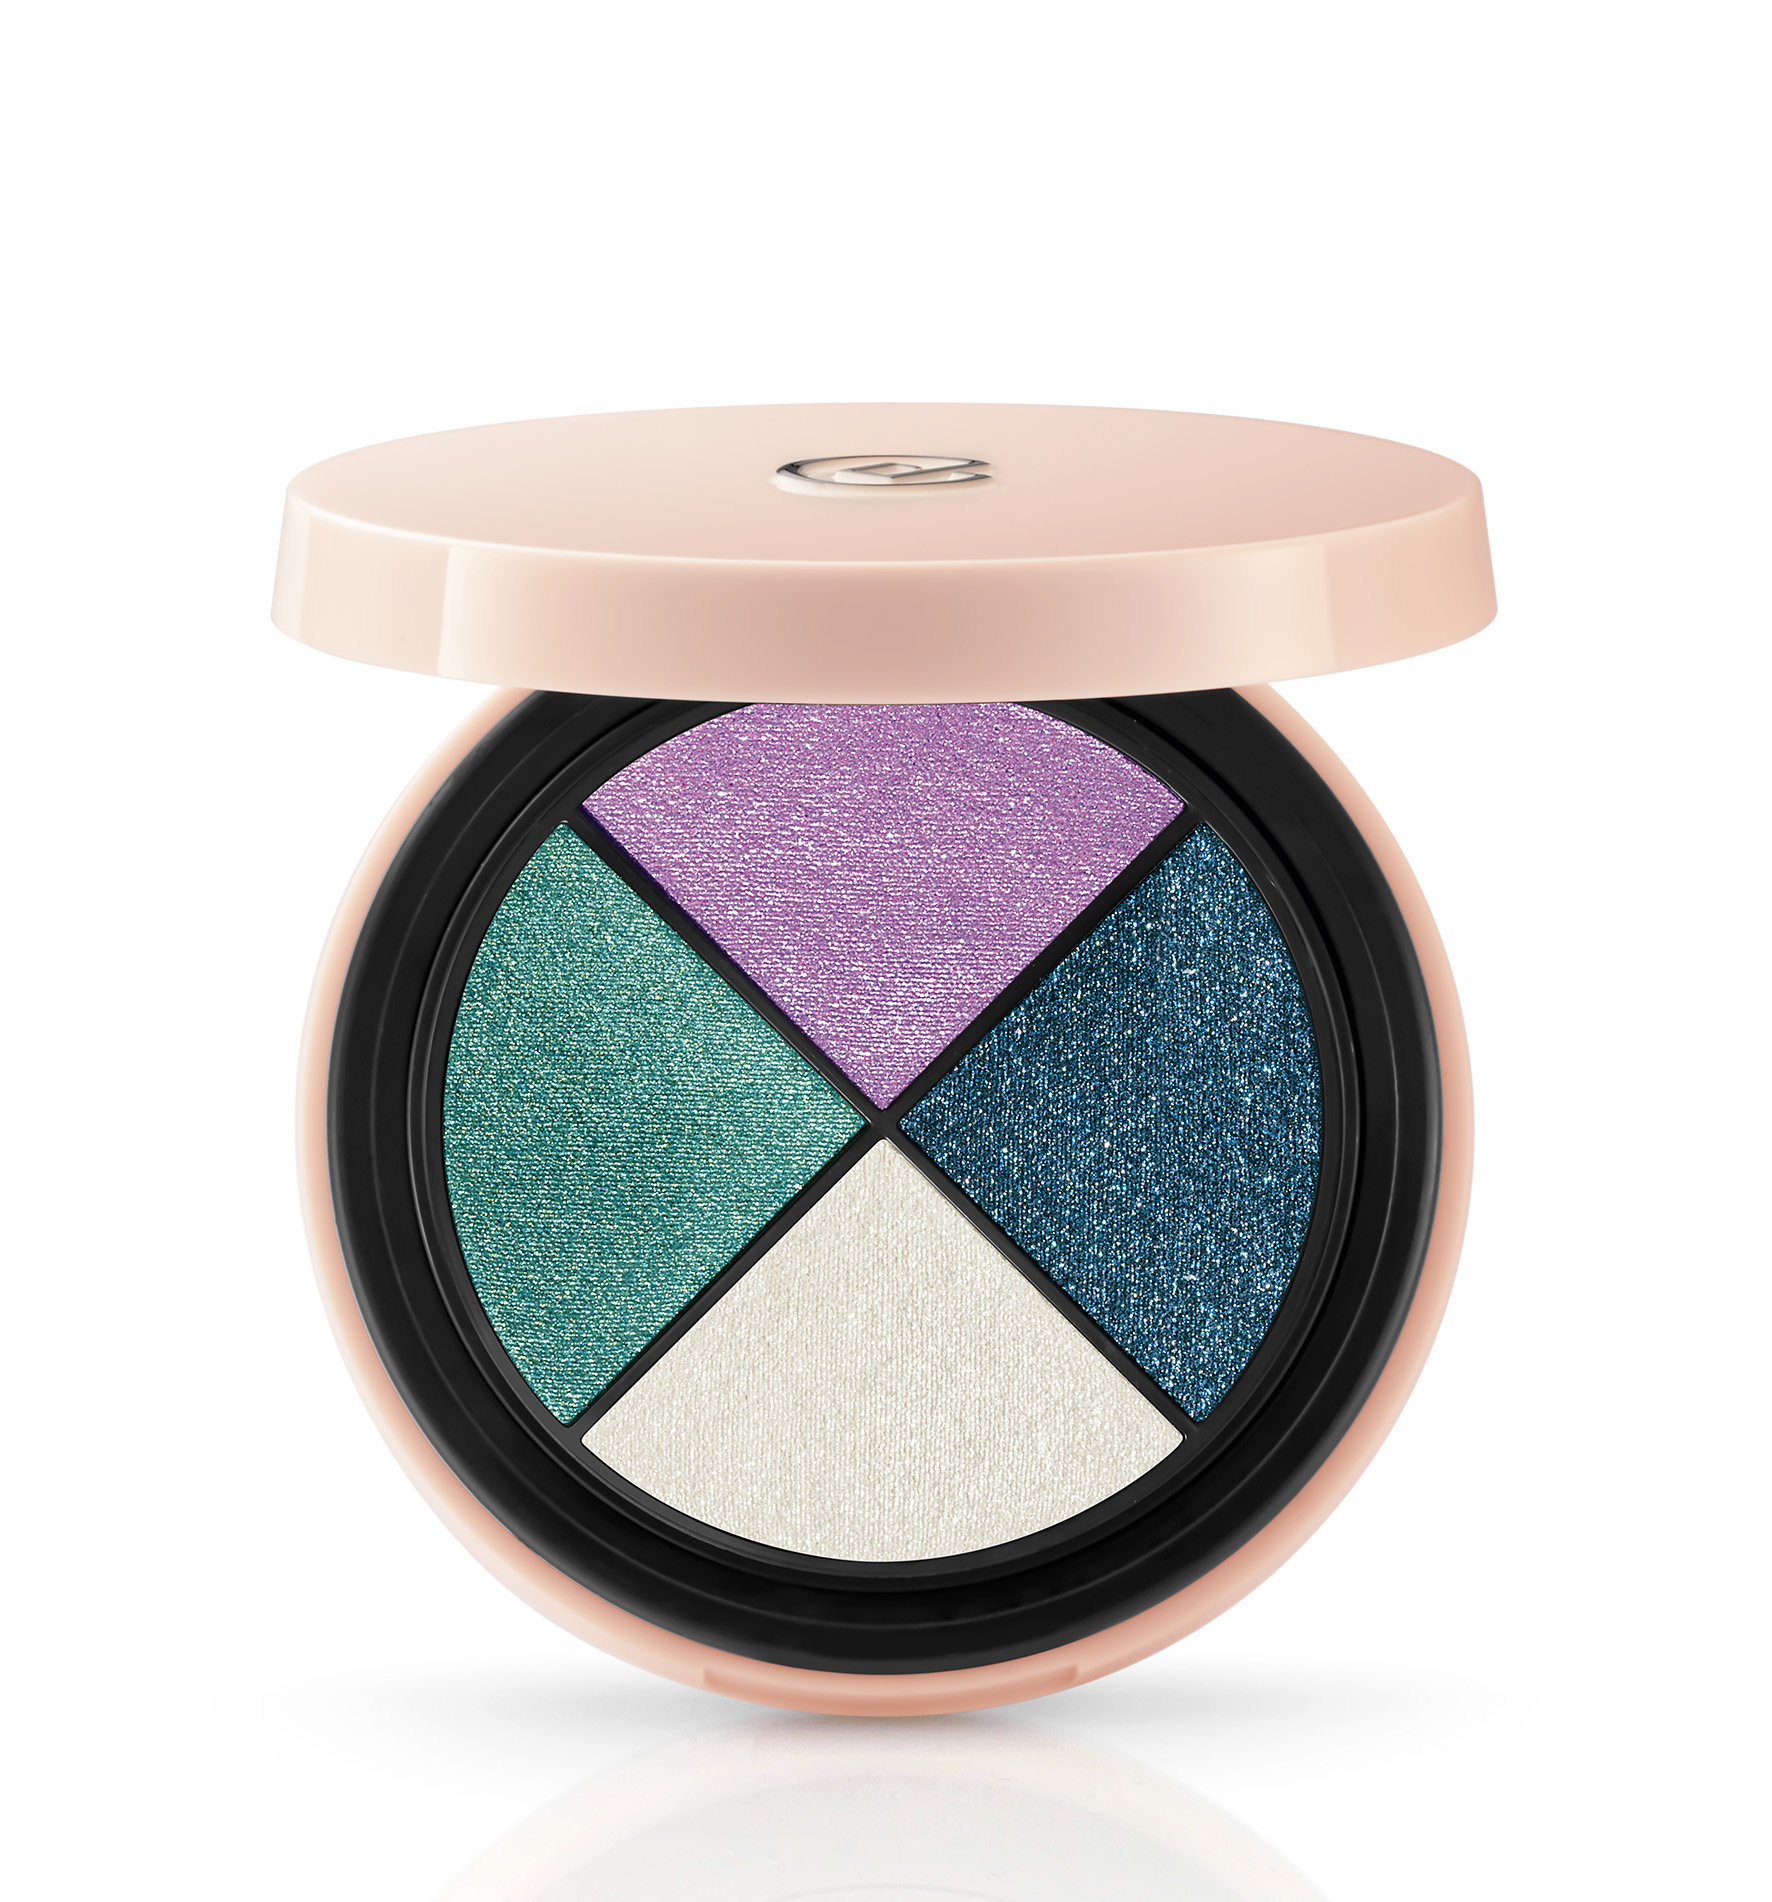 IMPECCABILE 4 EYE SHADOW PALETTE - 01 MILANO VIBES - MAKE UP | Collistar - Shop Online Ufficiale